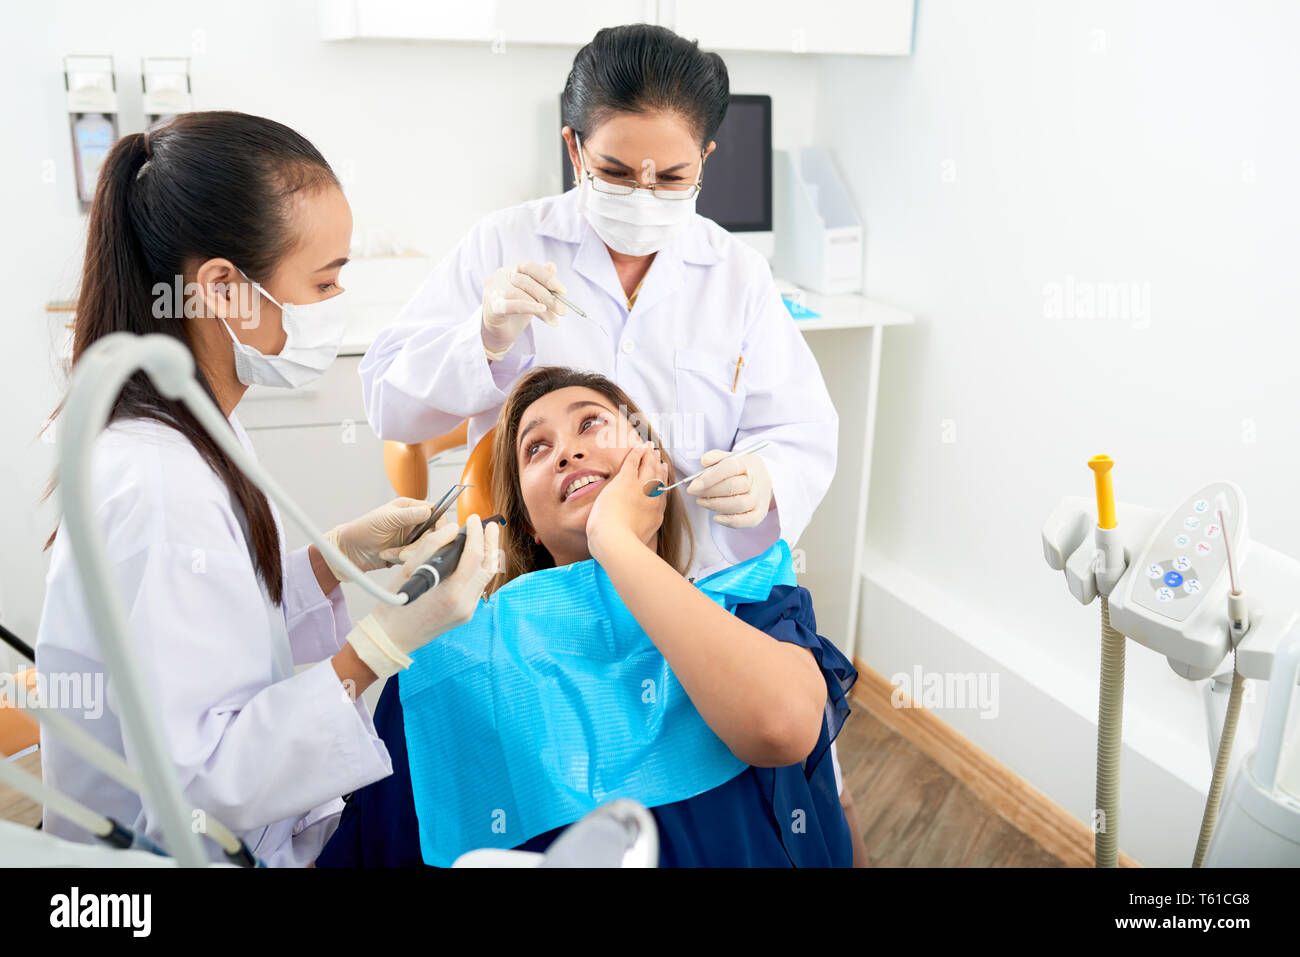 Woman with toothache waiting for treatment Stock Photo